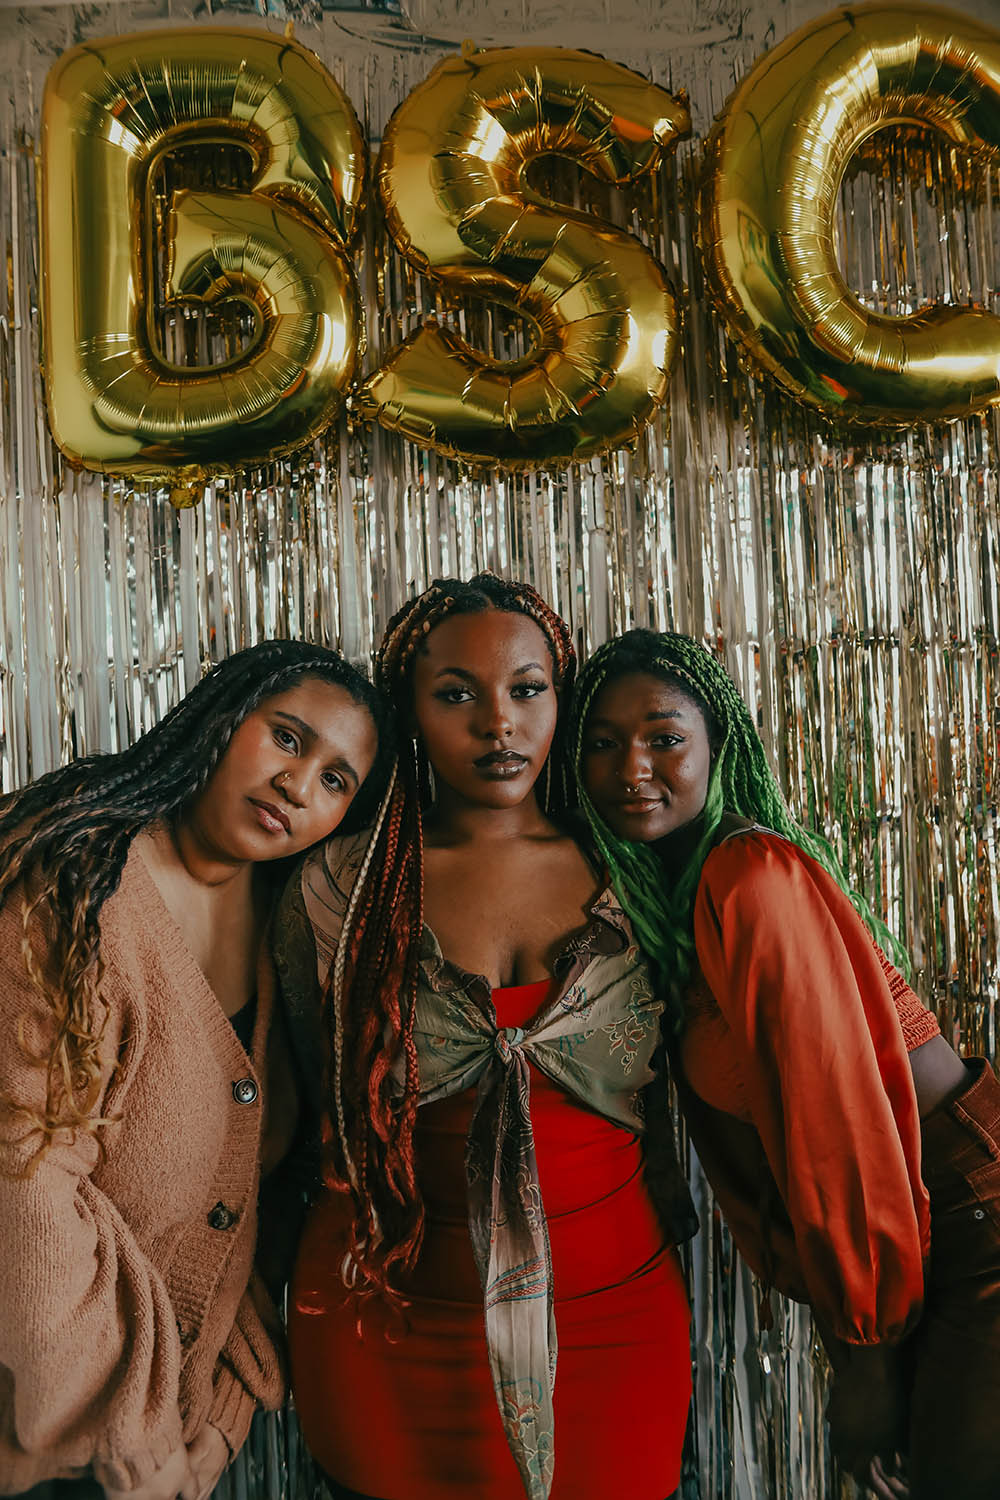 Three Black women with colorful braids pose together under gold "BSC" balloons